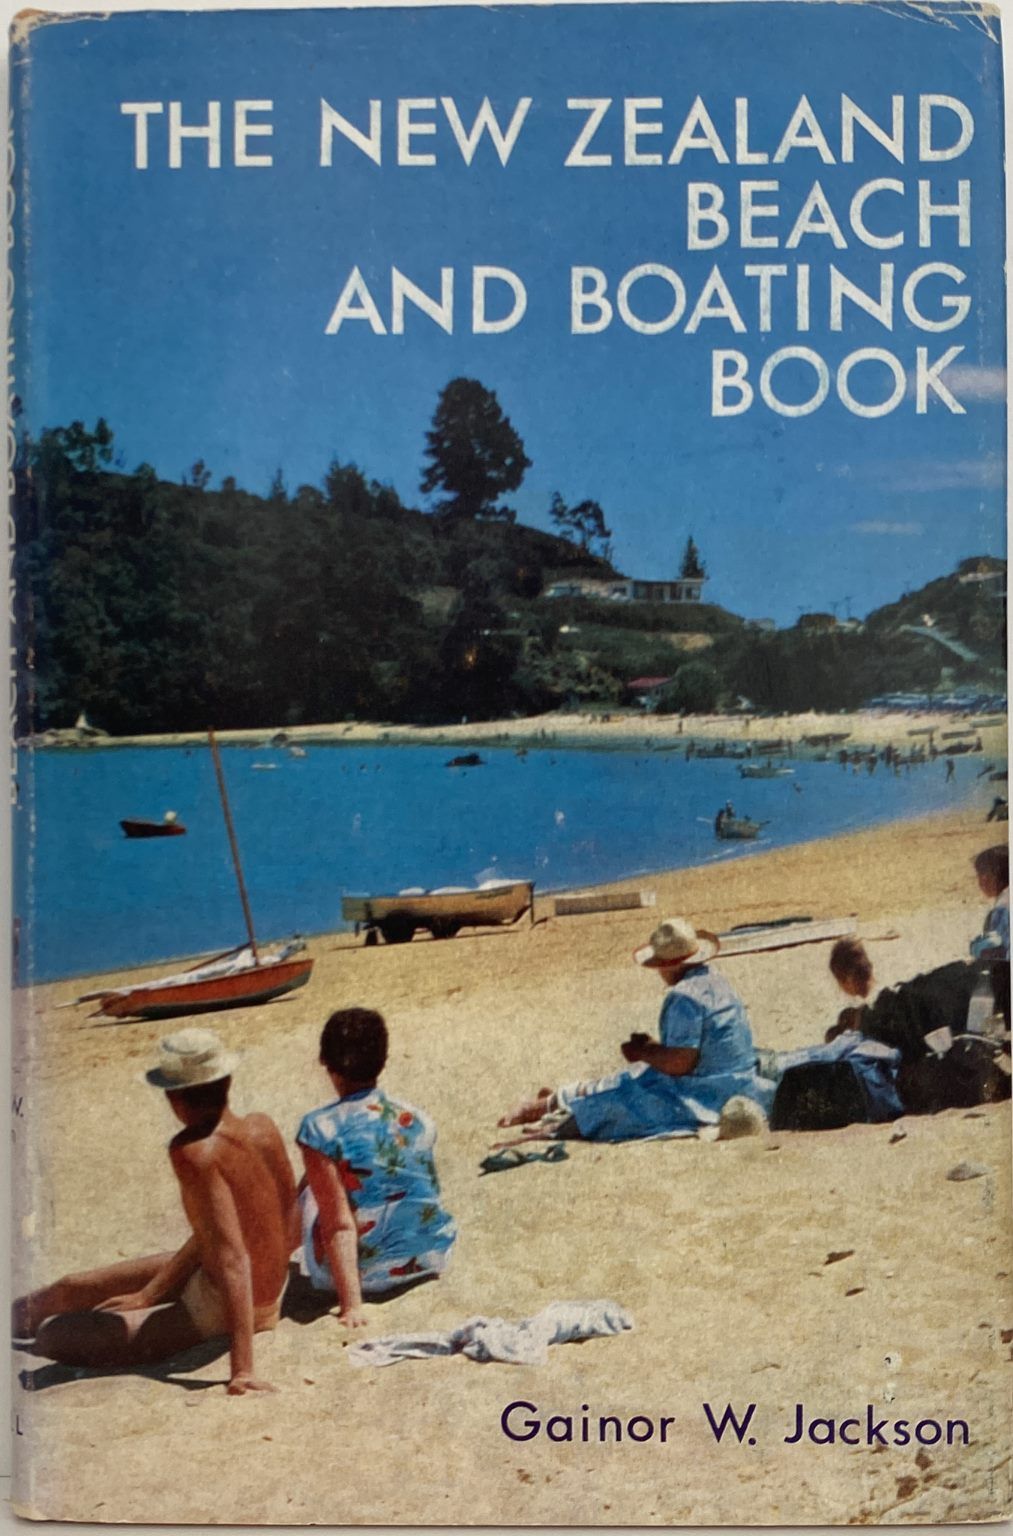 THE NEW ZEALAND BEACH & BOATING BOOK